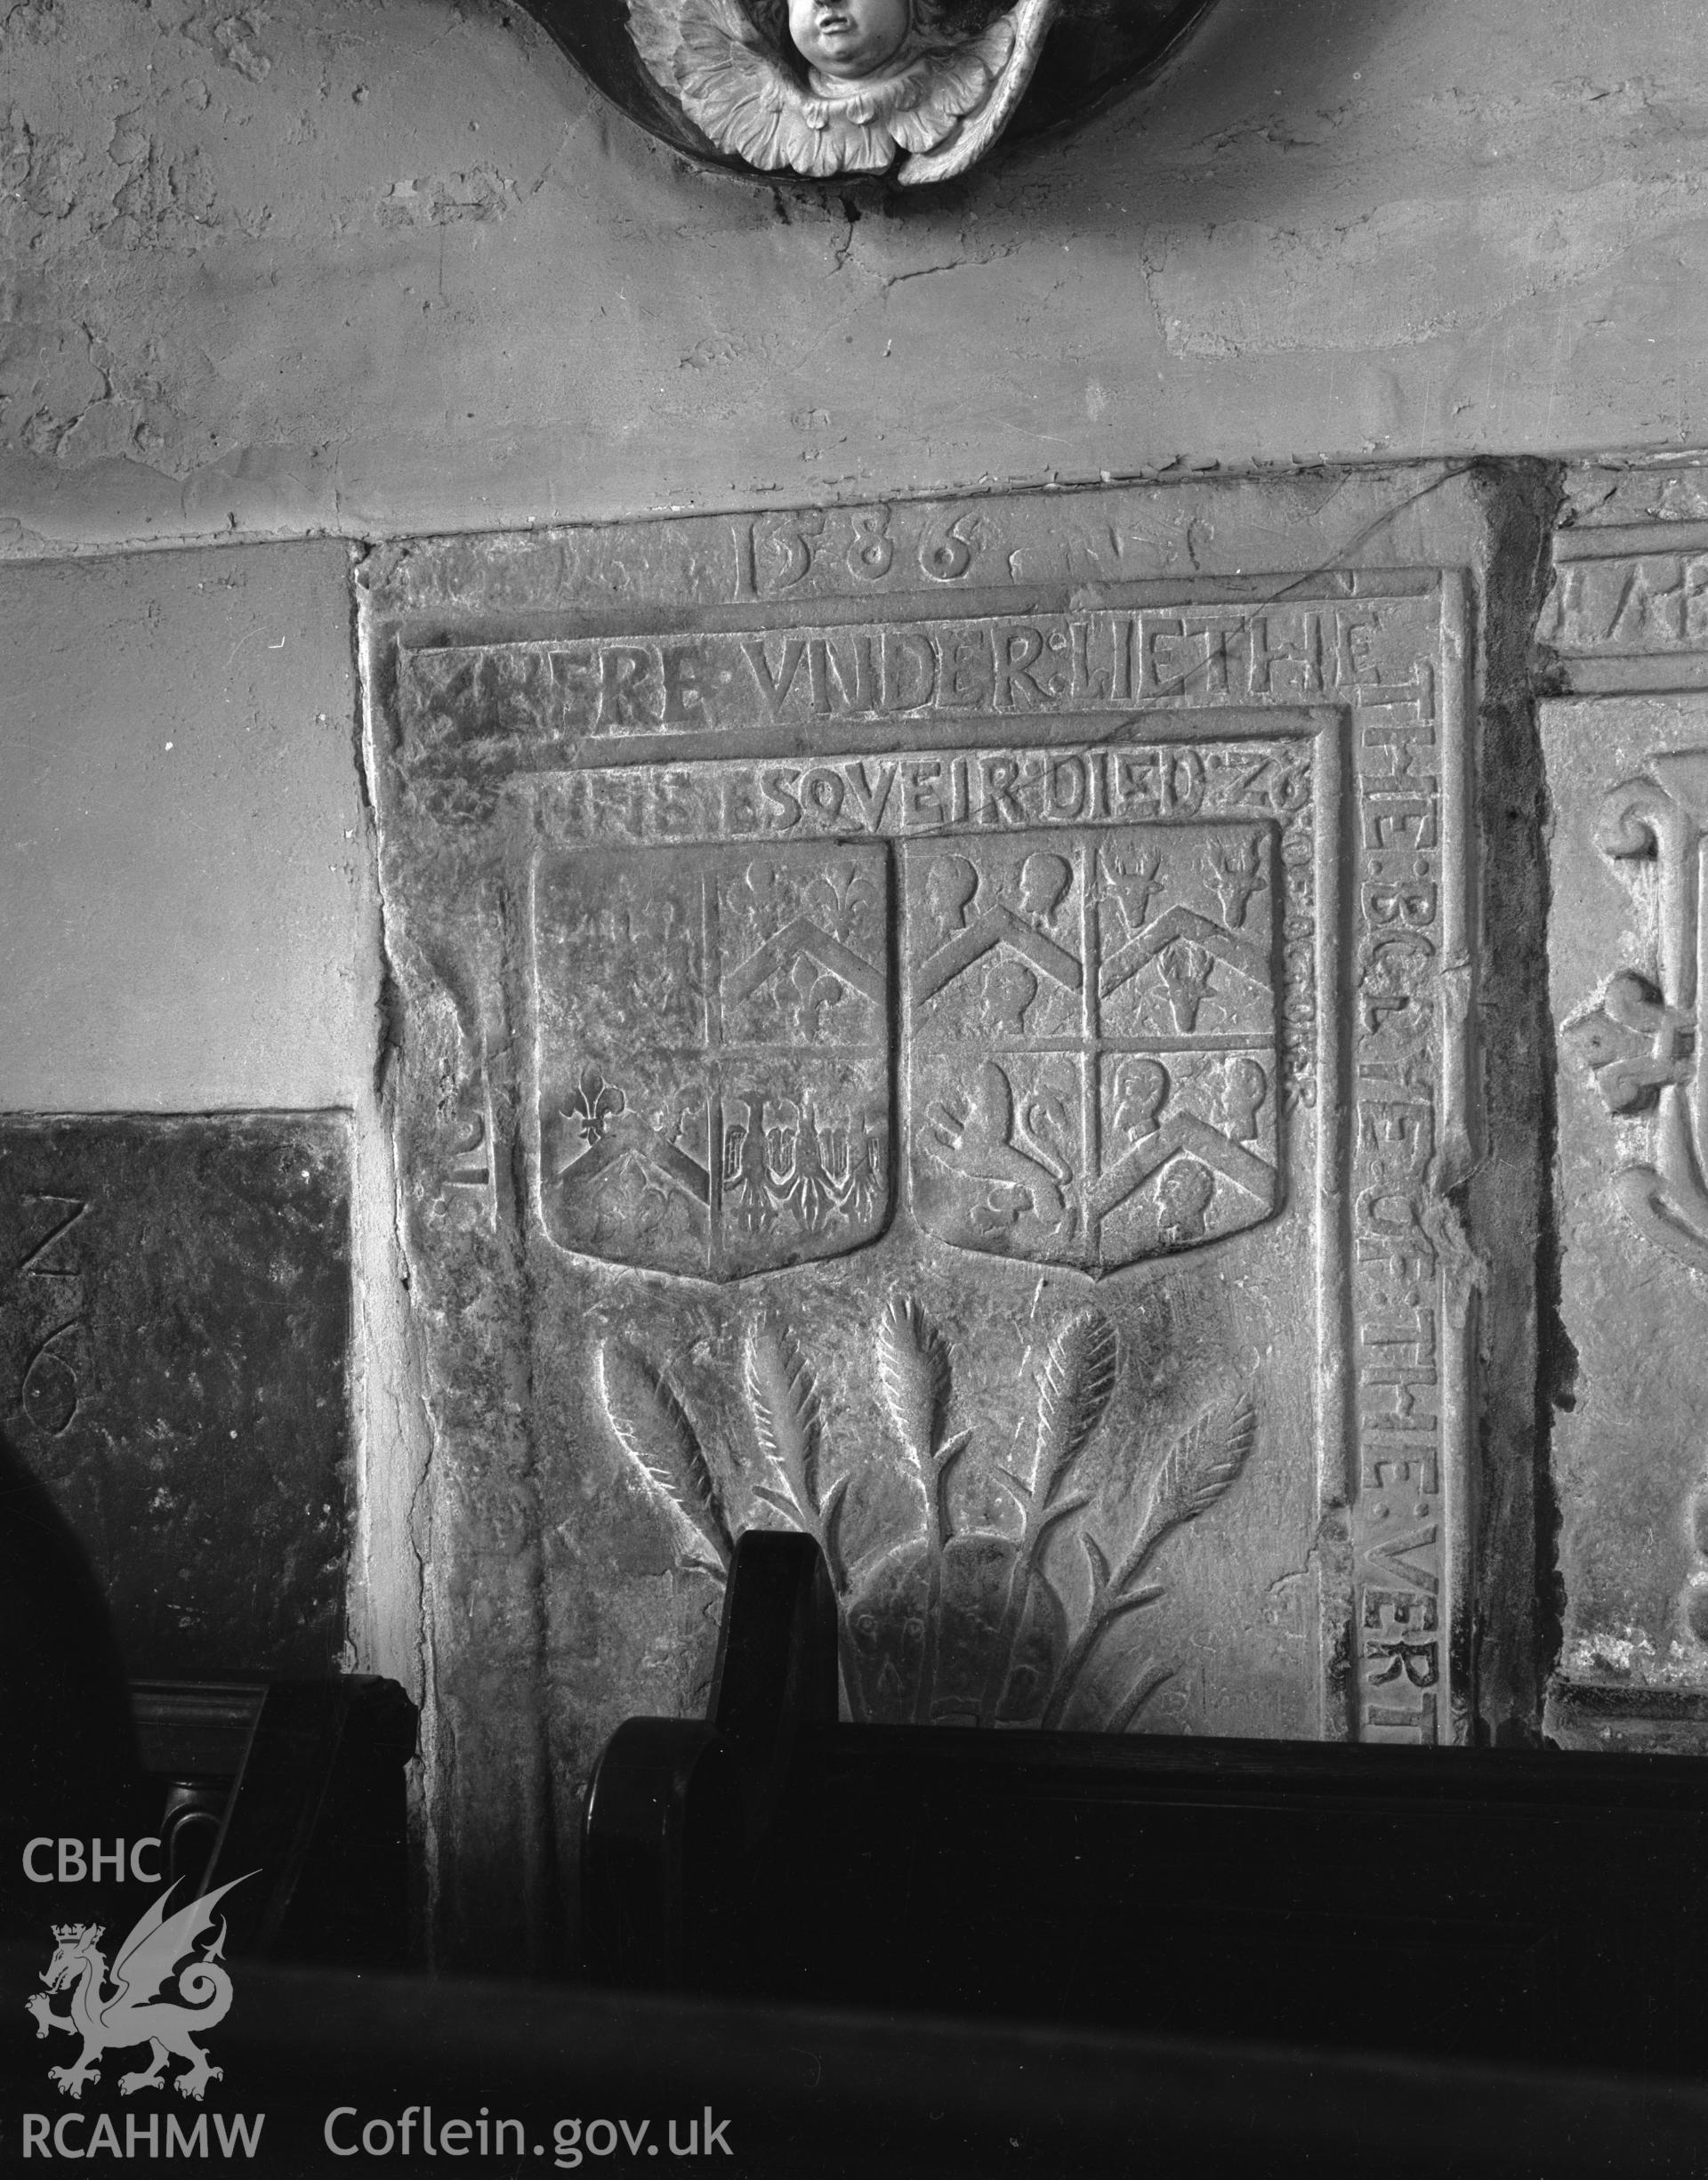 Interior view of St Marys Church Conwy showing inscribed stone, taken in 10.09.1951.